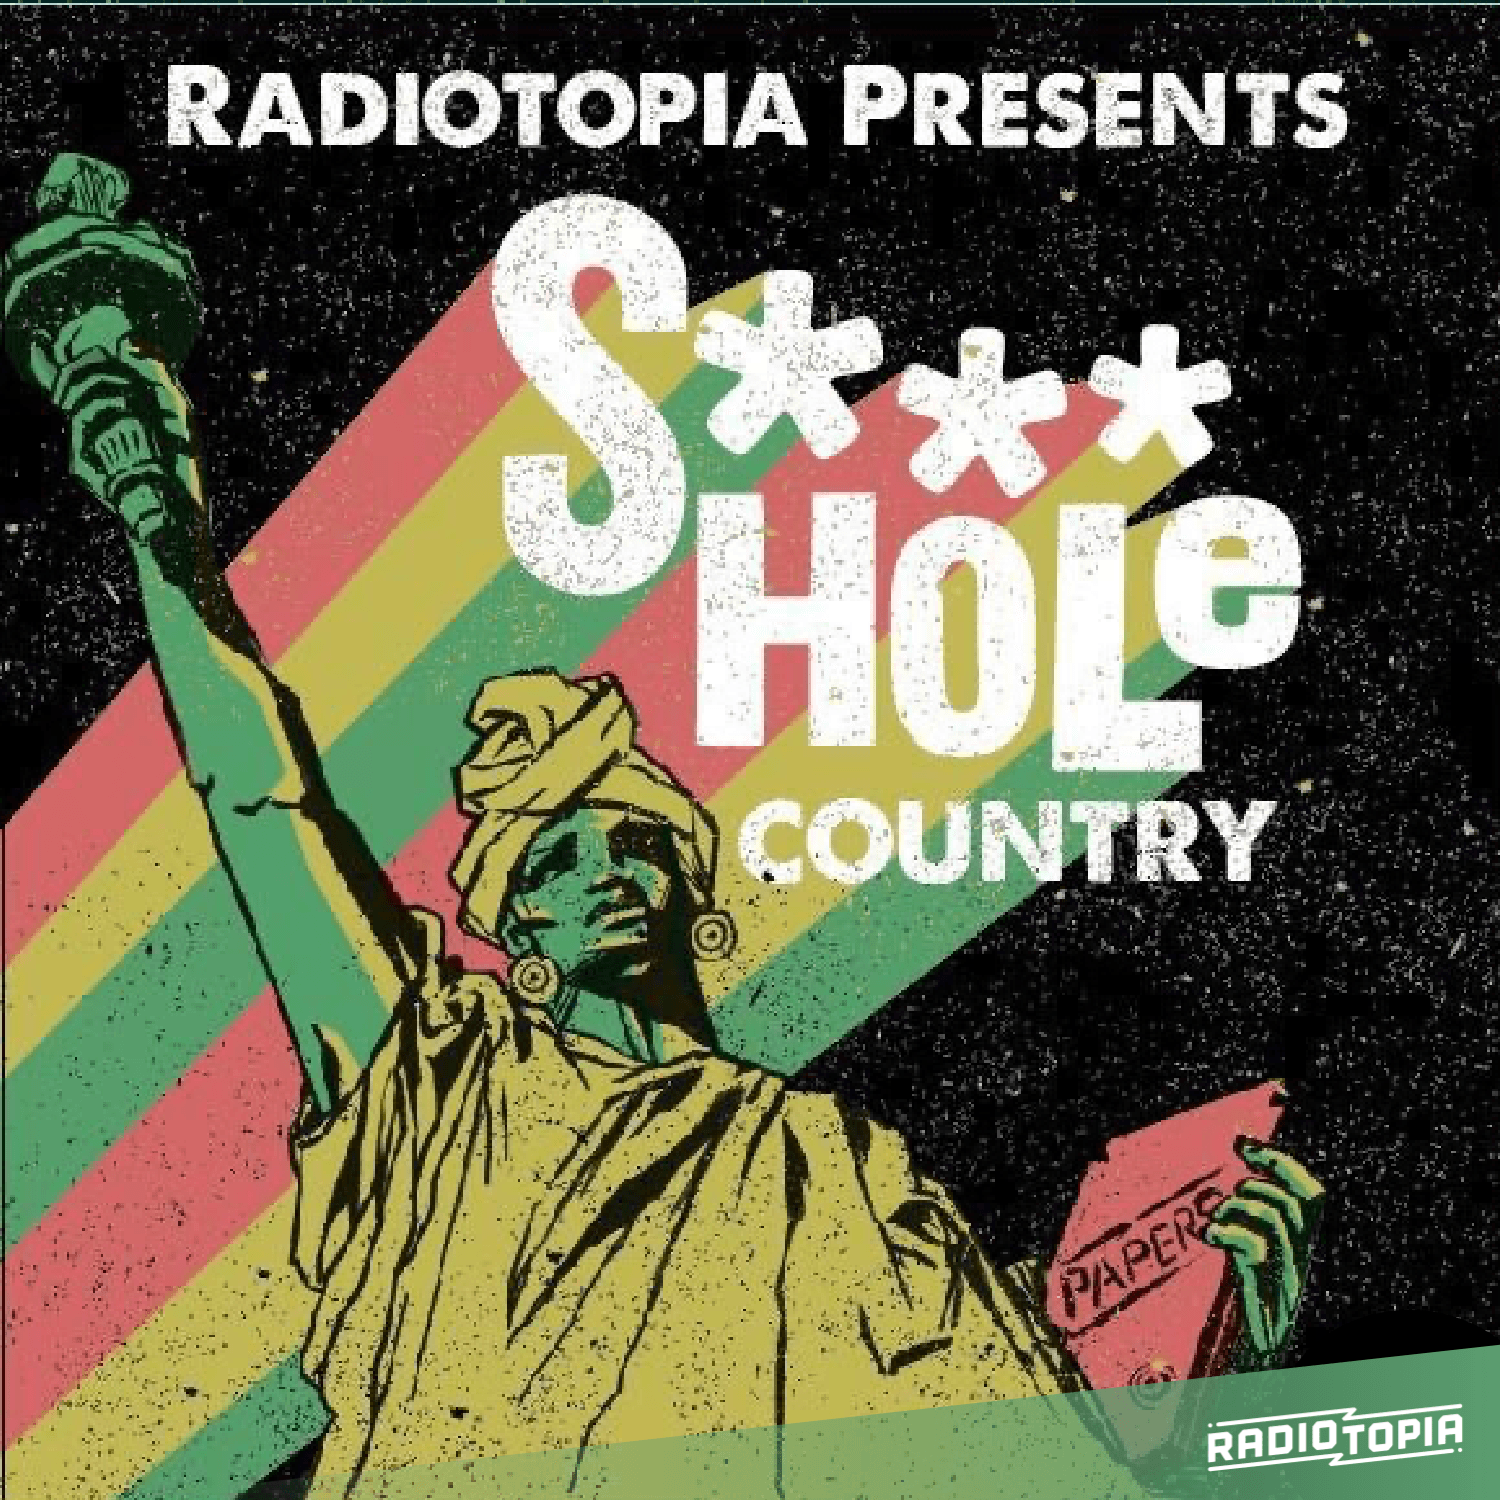 Thumbnail for "S***hole Country: The Quiet Part".